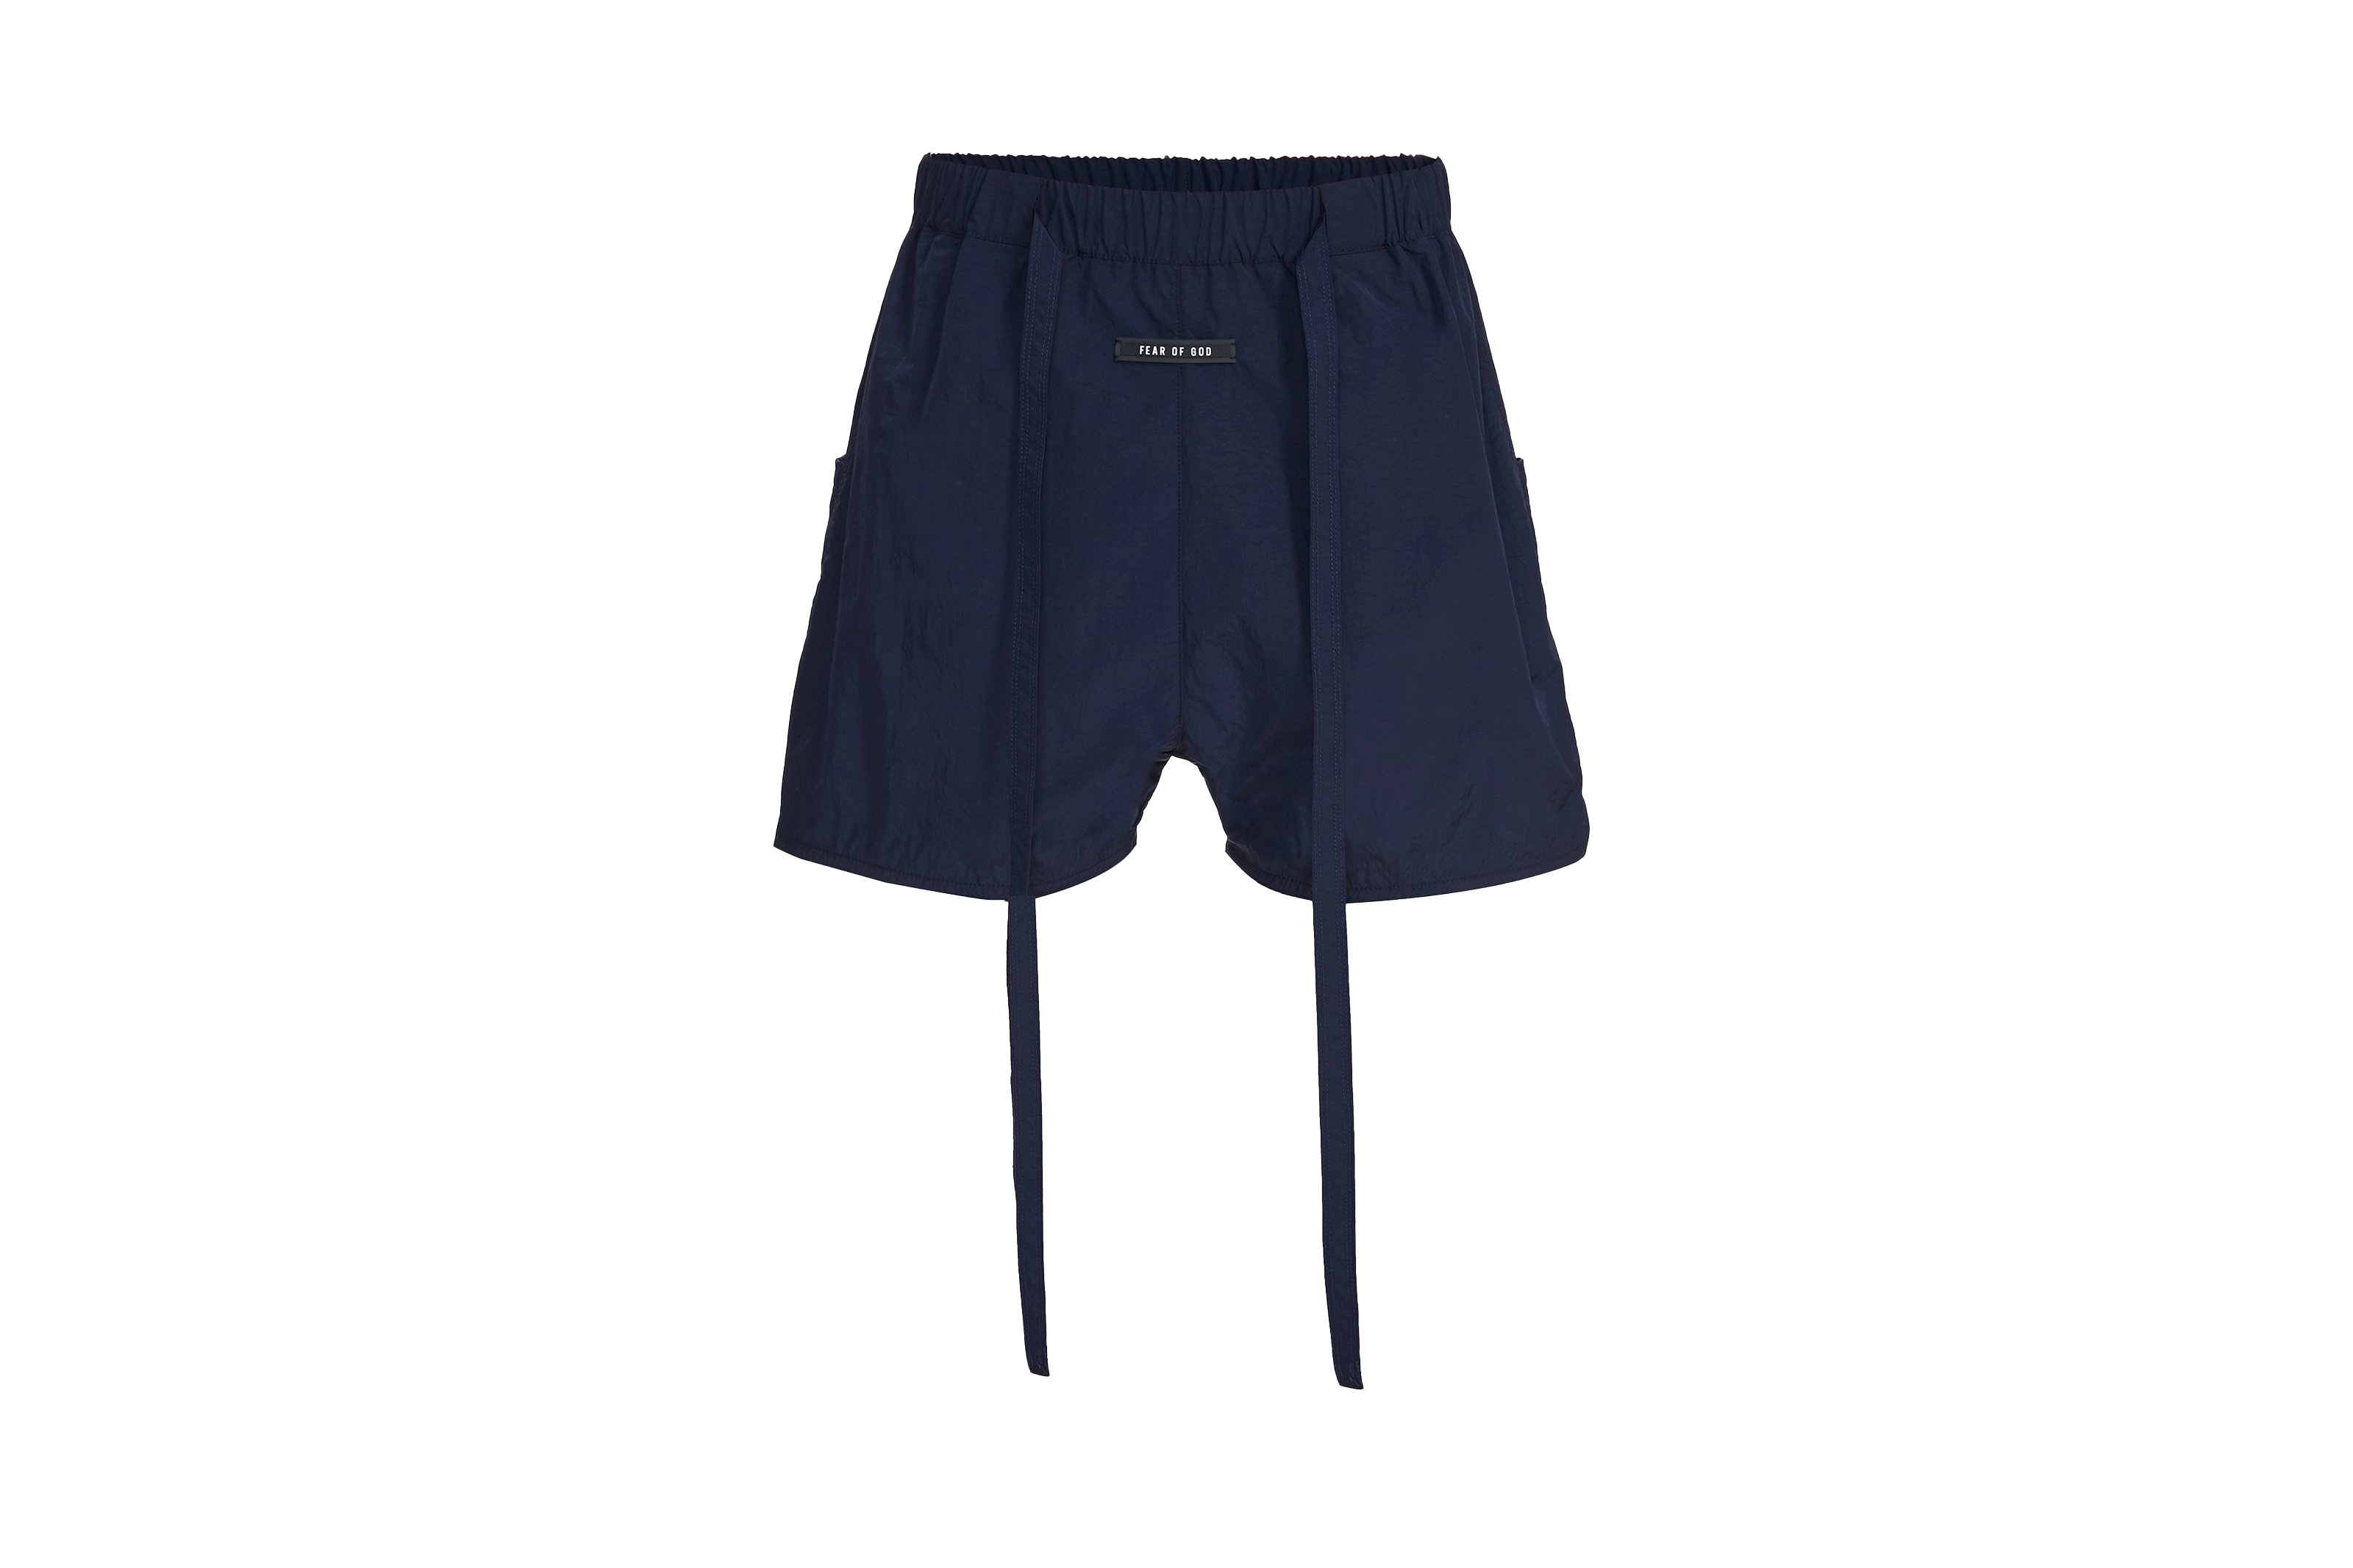 FEAR OF GOD Military Training Shorts Navy - SIXTH COLLECTION - US